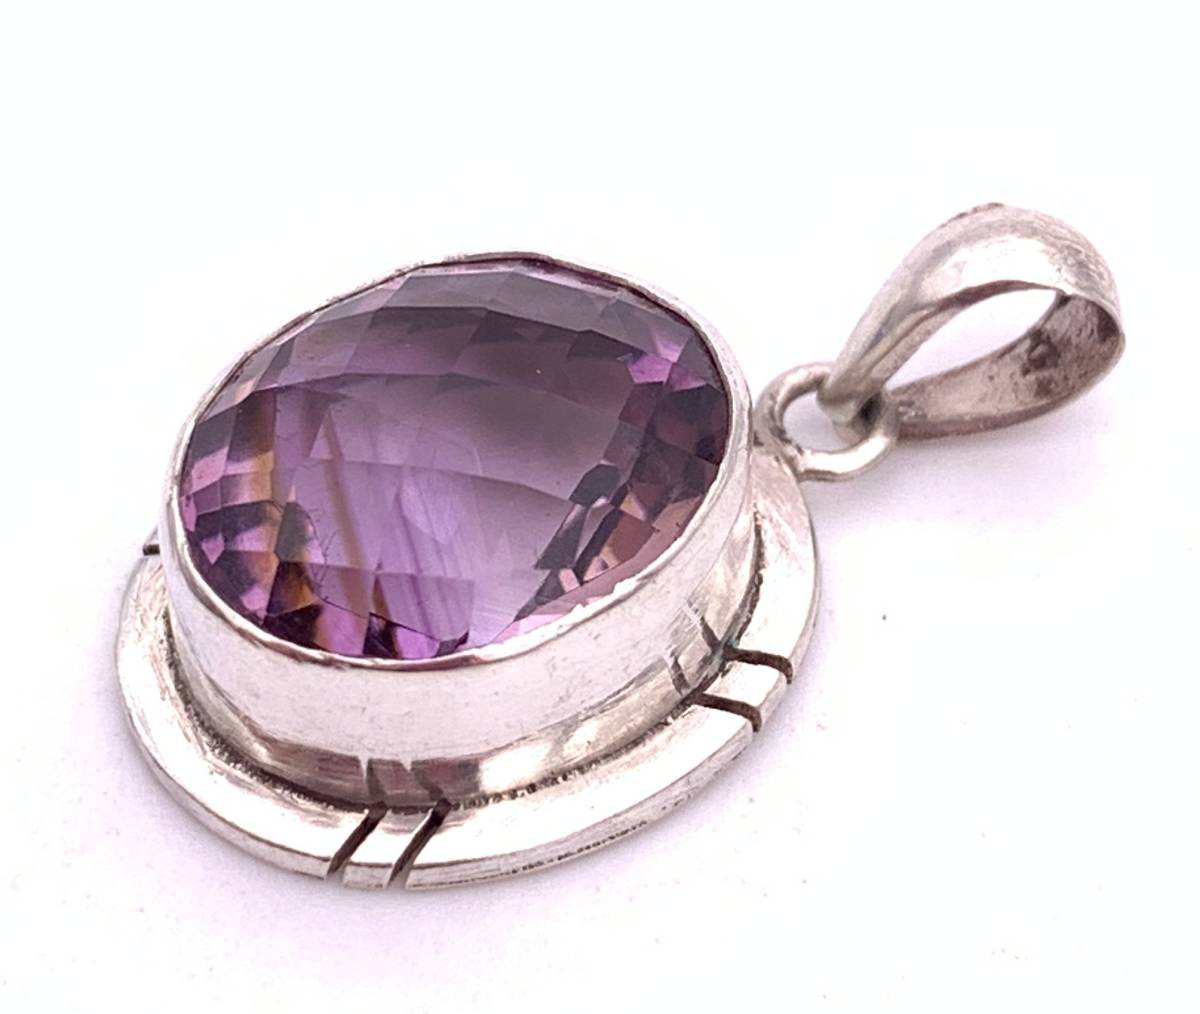  natural stone amethyst ( purple crystal )silver925 top -0AS6